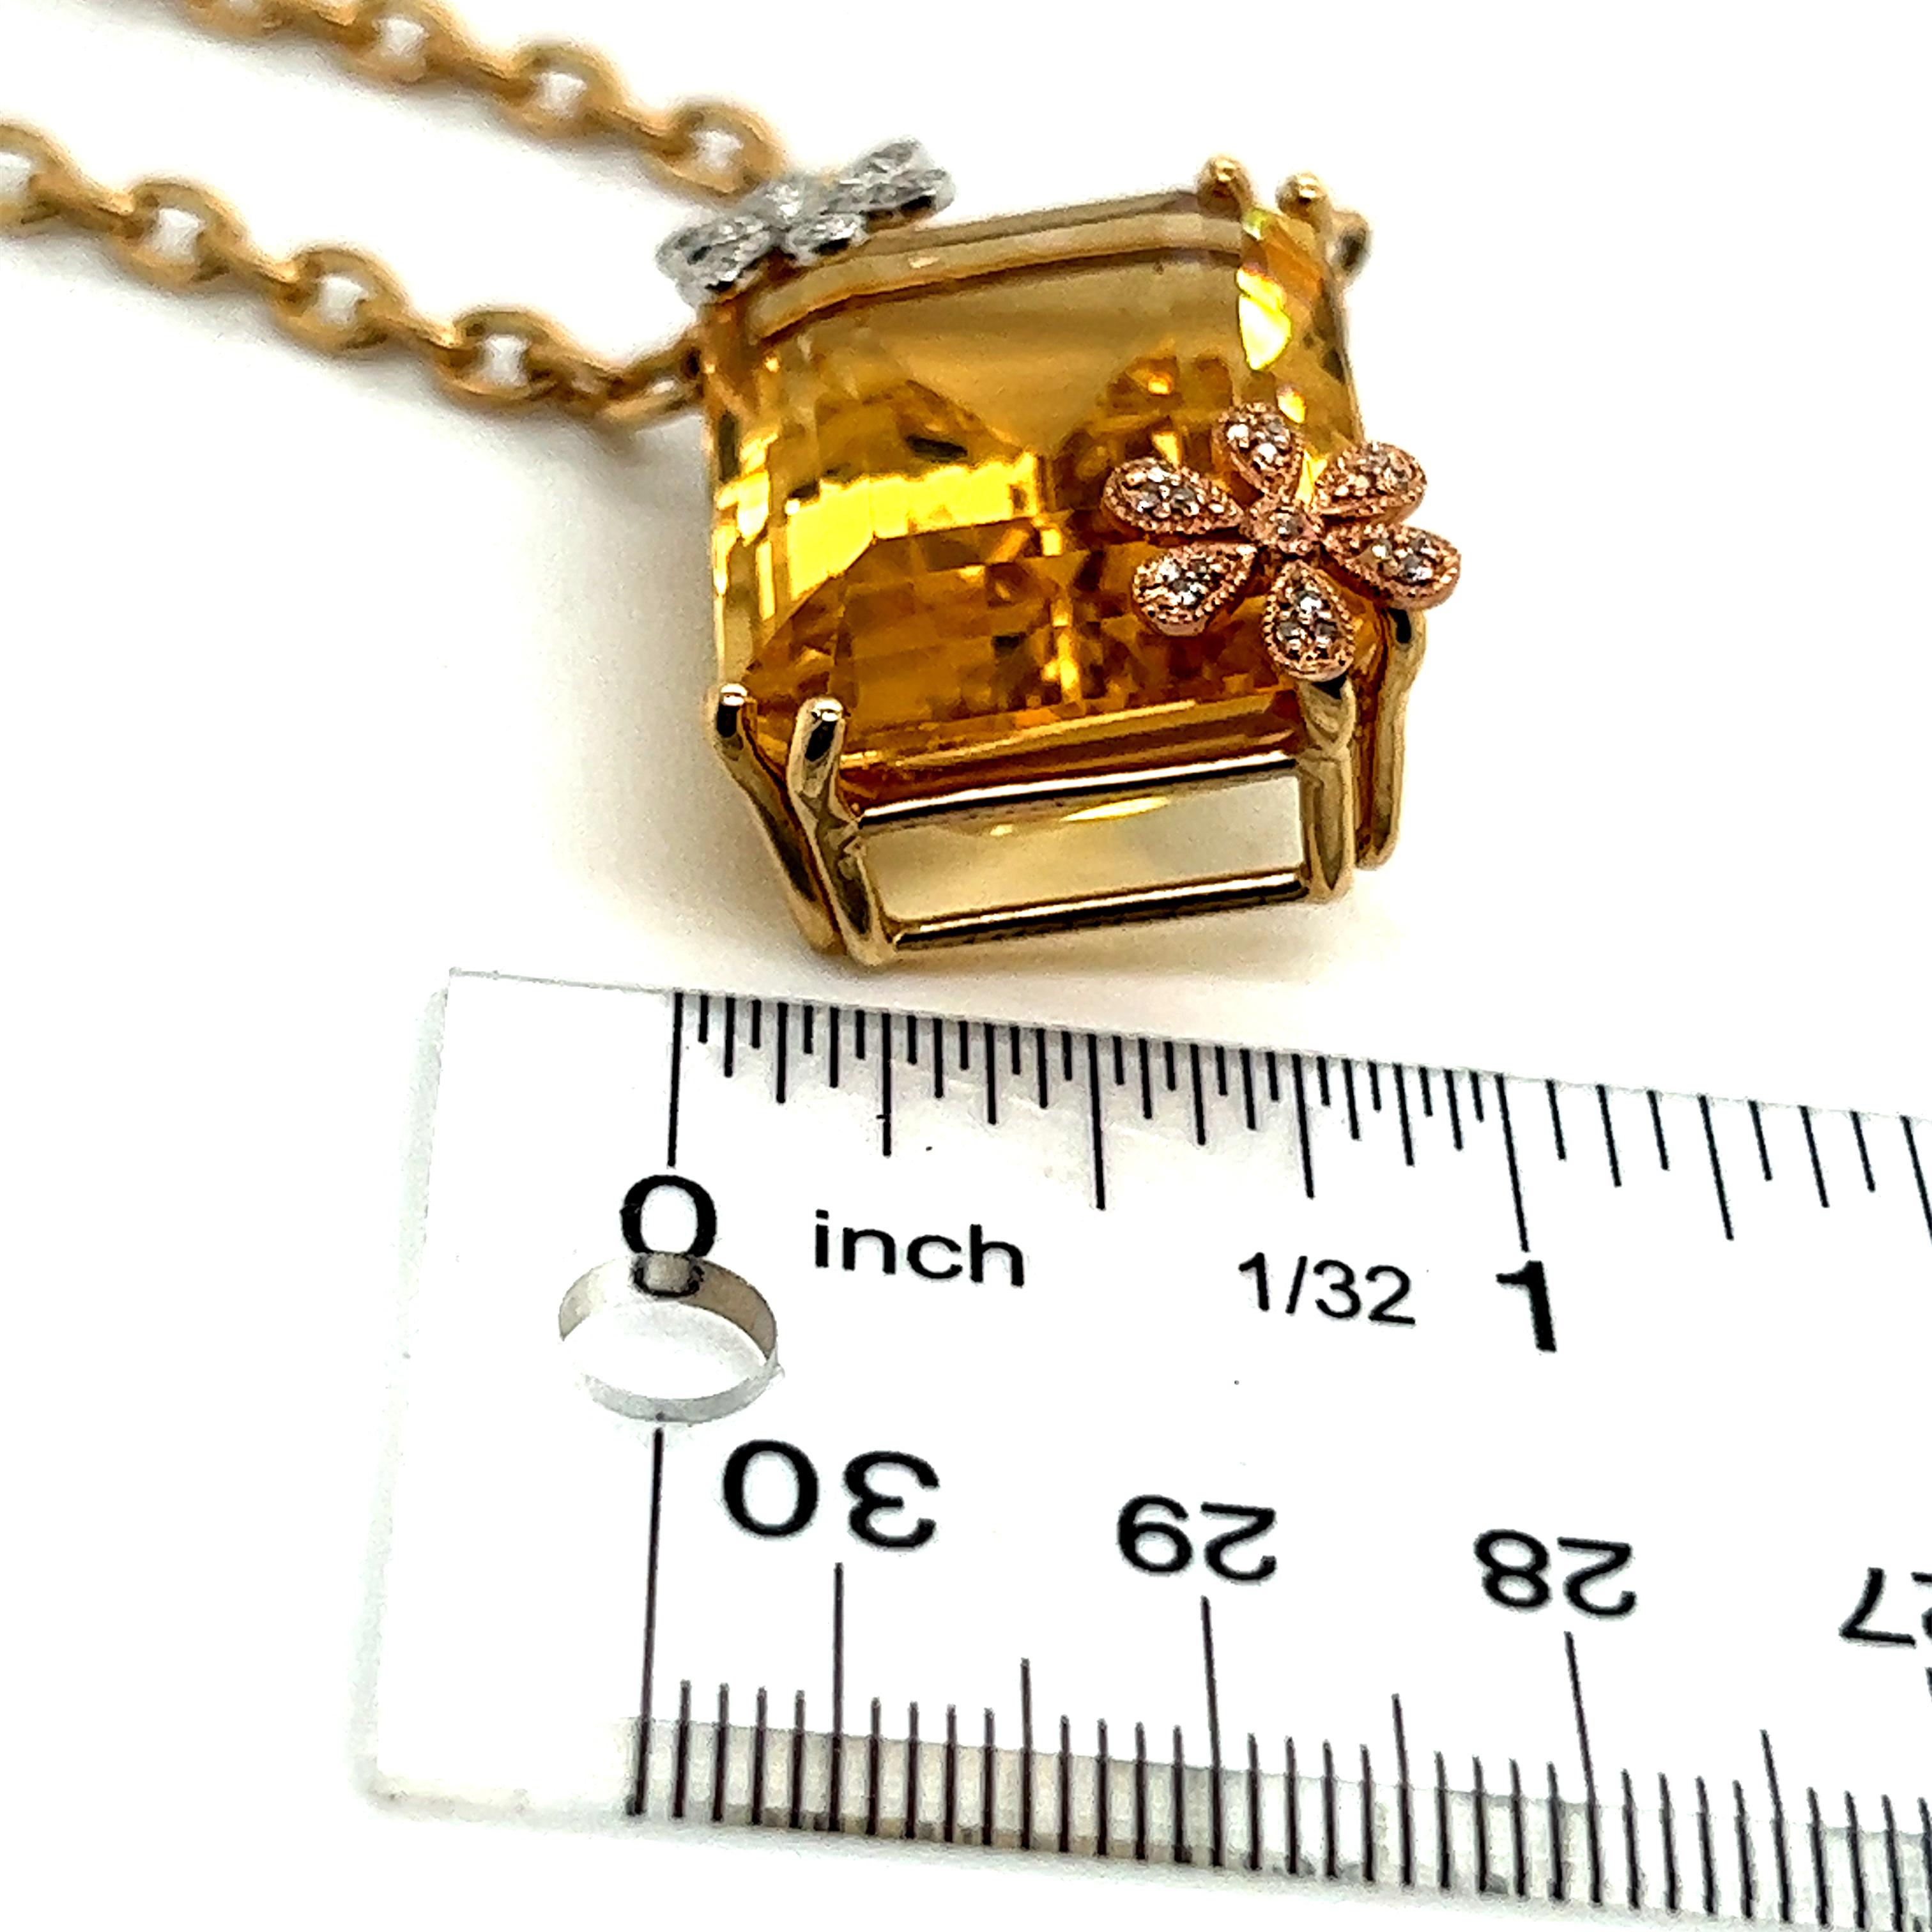 Natural Finely Faceted Quality Citrine Diamond Necklace 14k Gold 25.12 TCW Women Certified $3,950 915314

This is a Unique Custom Made Glamorous Piece of Jewelry!

MADE IN ITALY

Nothing says, “I Love you” more than Diamonds and Pearls!

This